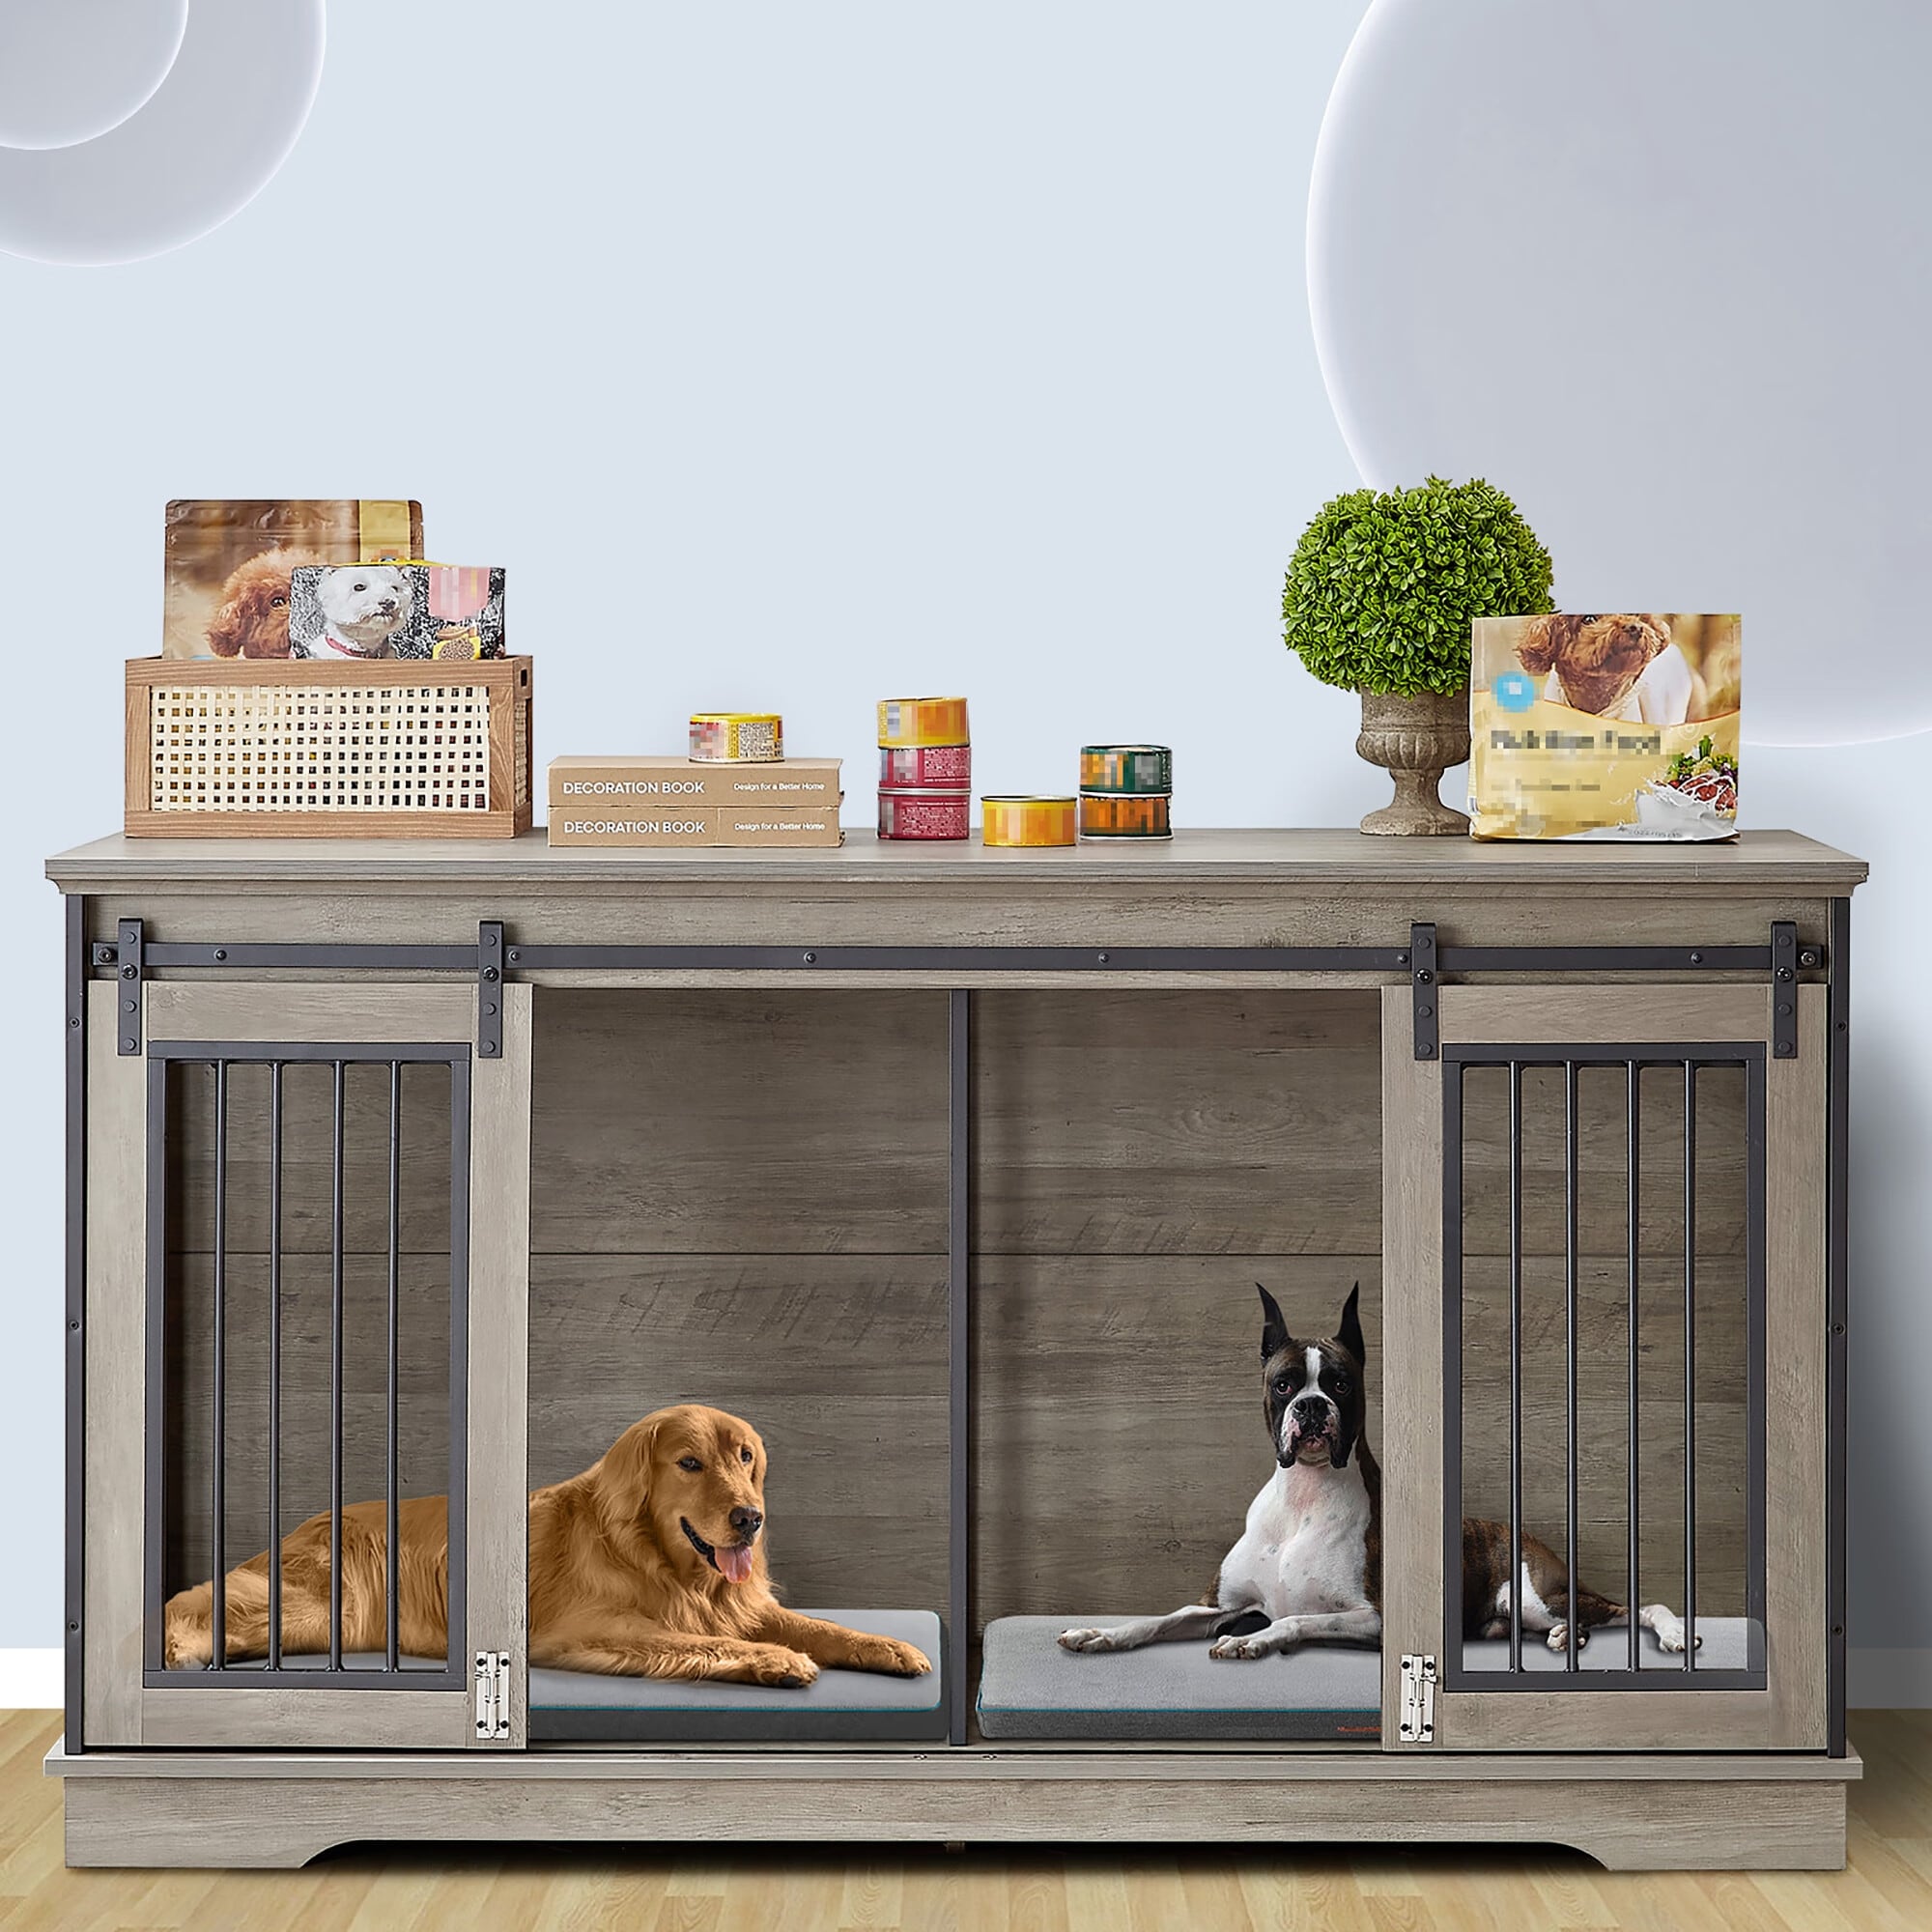 https://ak1.ostkcdn.com/images/products/is/images/direct/062670674758bb9e5cb764a78c76ef42dc1936a3/Sapphome-Dog-Crate-Furniture-Large-Breed-TV-Stand-with-2-Sliding-Doors%2CGrey.jpg